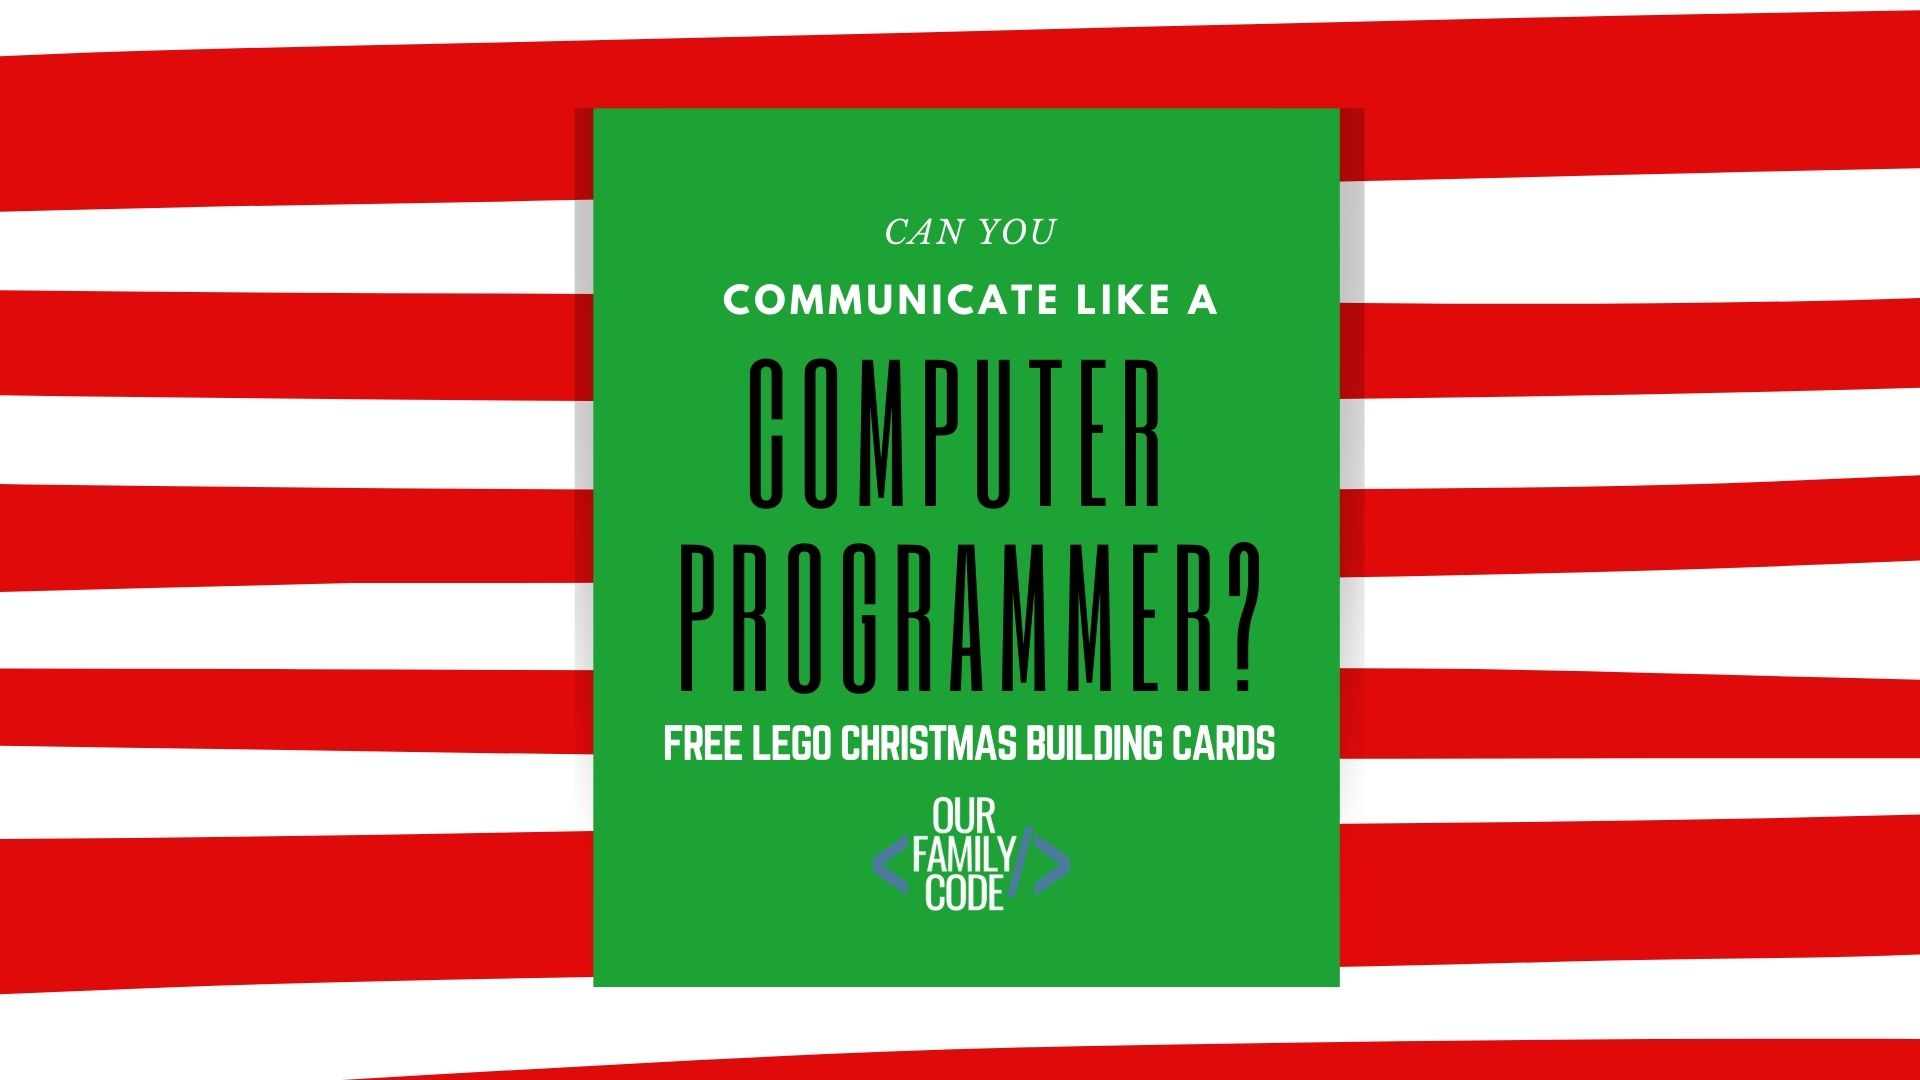 A picture of "Can you communicate like a computer programmer? Free LEGO Christmas building card" text on a green square over a red white striped background.